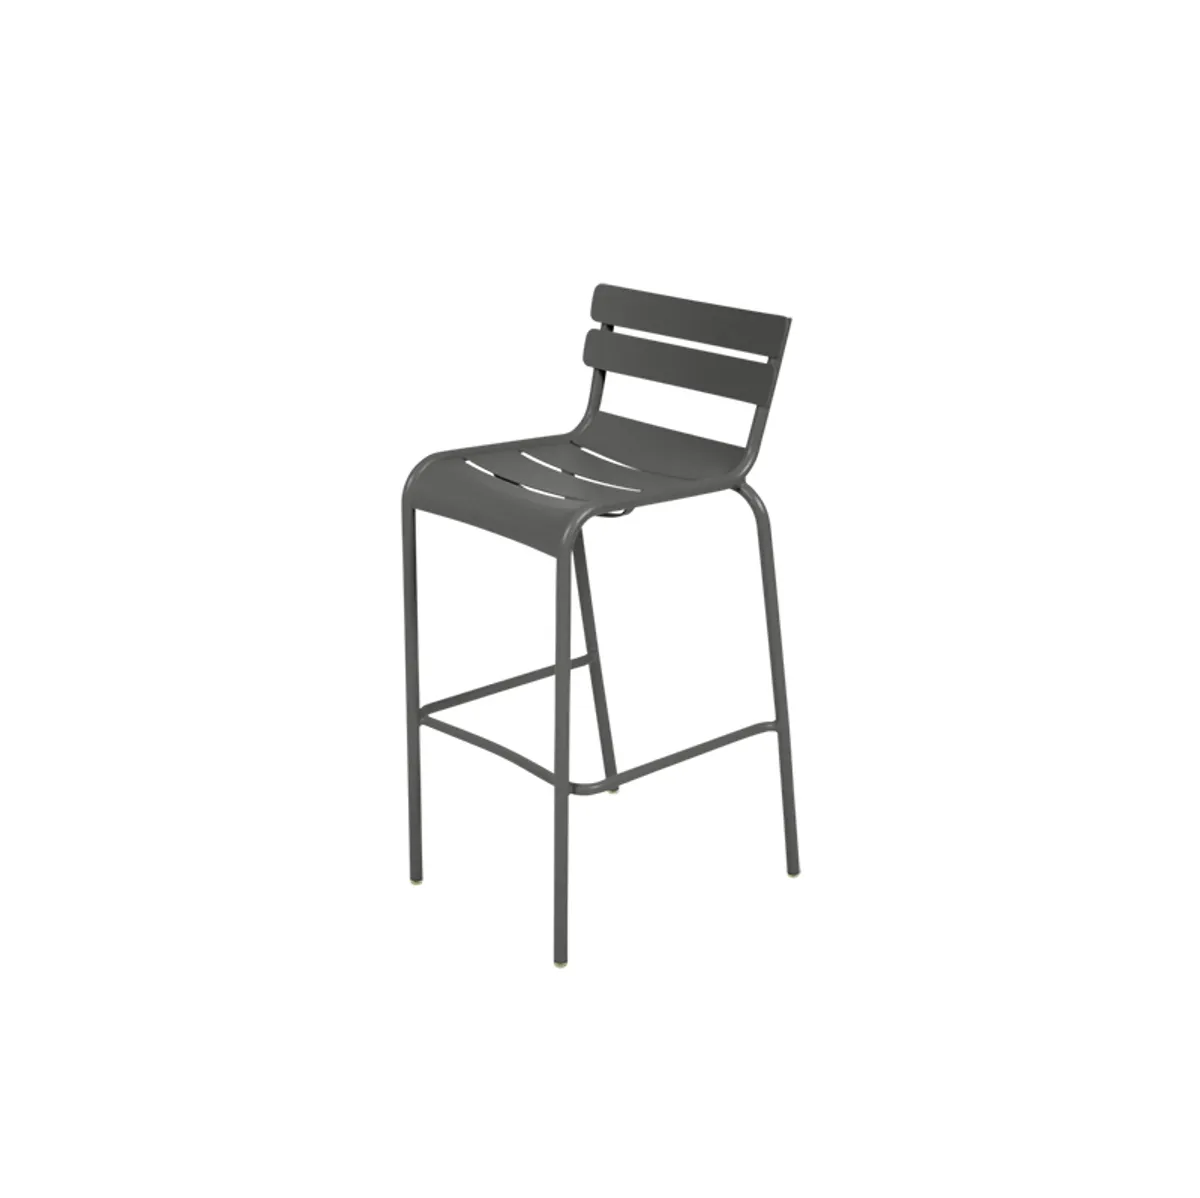 Luxembourg High Stool Furniture For Outdoor Cafe And Bars Black